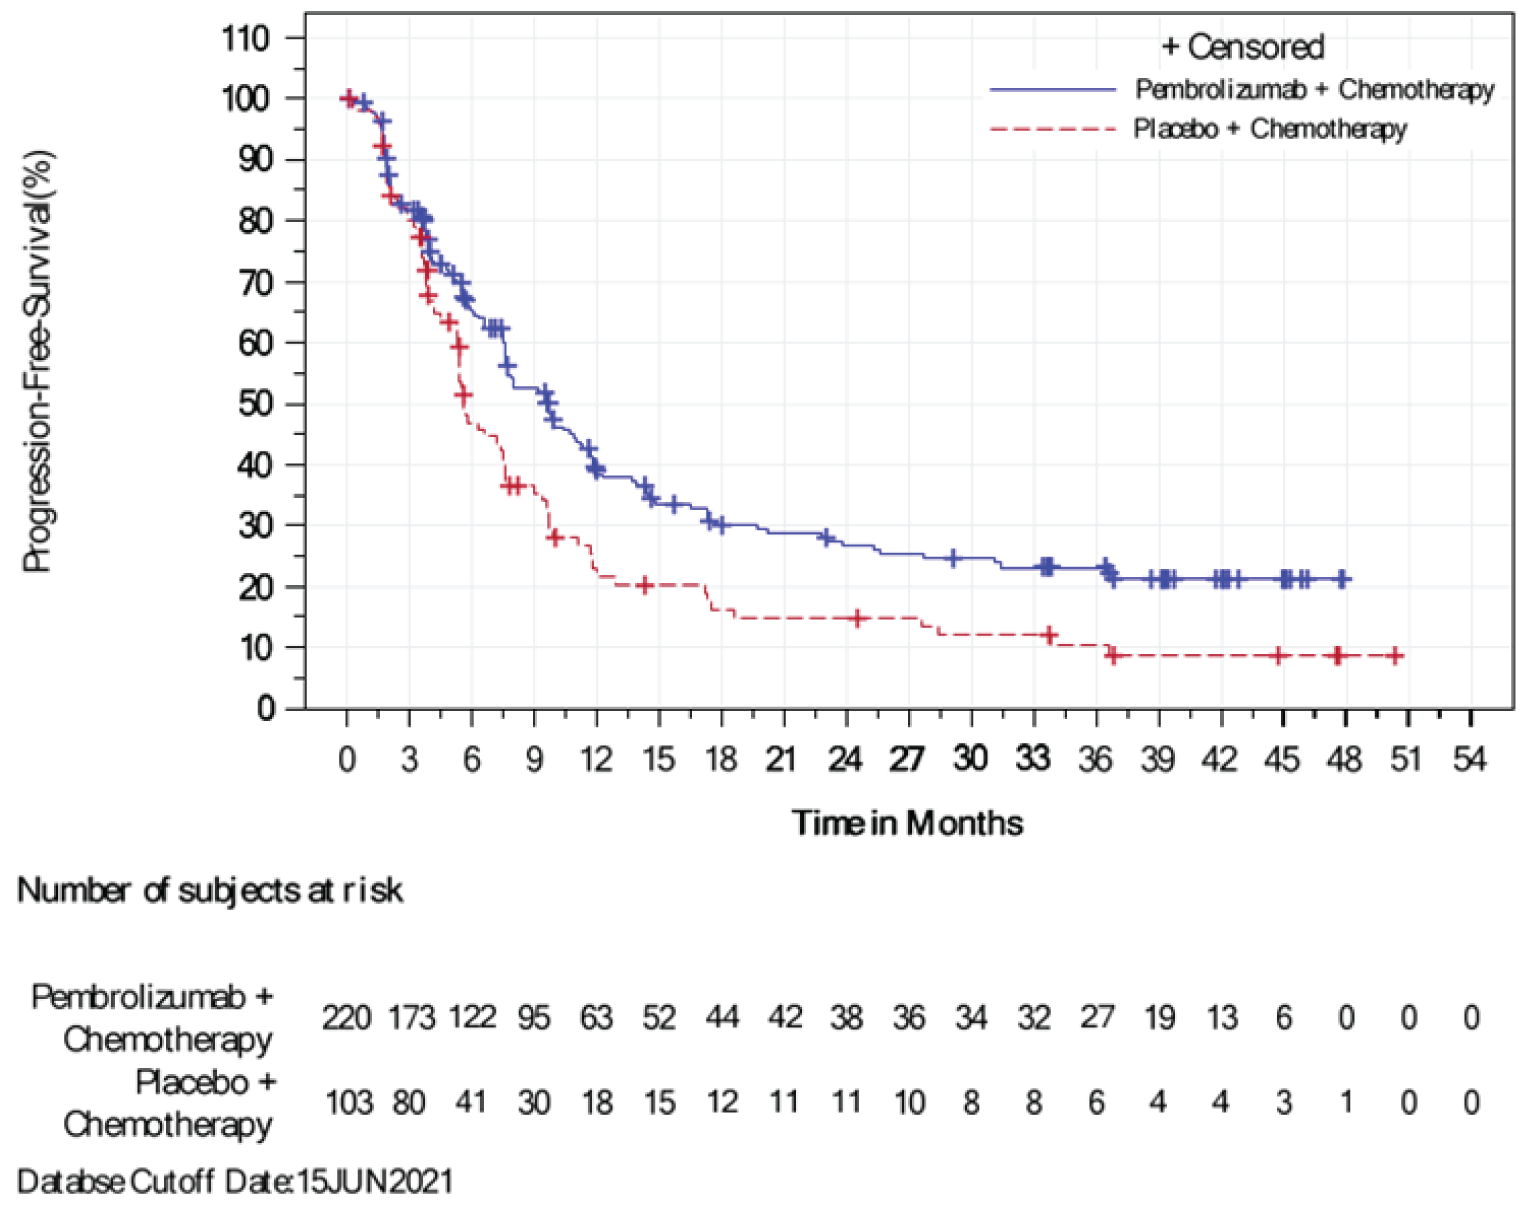 Figure shows the Kaplan-Meier estimates of PFS at final analysis in the ITT population and subset of patients with PD-L1–positive tumours (CPS ≥ 10). The total numbers of at-risk patients in the pembrolizumab plus chemotherapy group at 0, 3, 6, 9, 12, 15, 18, 21, 24, 27, 30, 33, 36, 39, 42, 45, 48, 51, and 54 months were 220, 173, 122, 95, 63, 52, 44, 42, 38, 36, 34, 32, 27, 19, 13, 6, 0, 0, and 0, respectively.